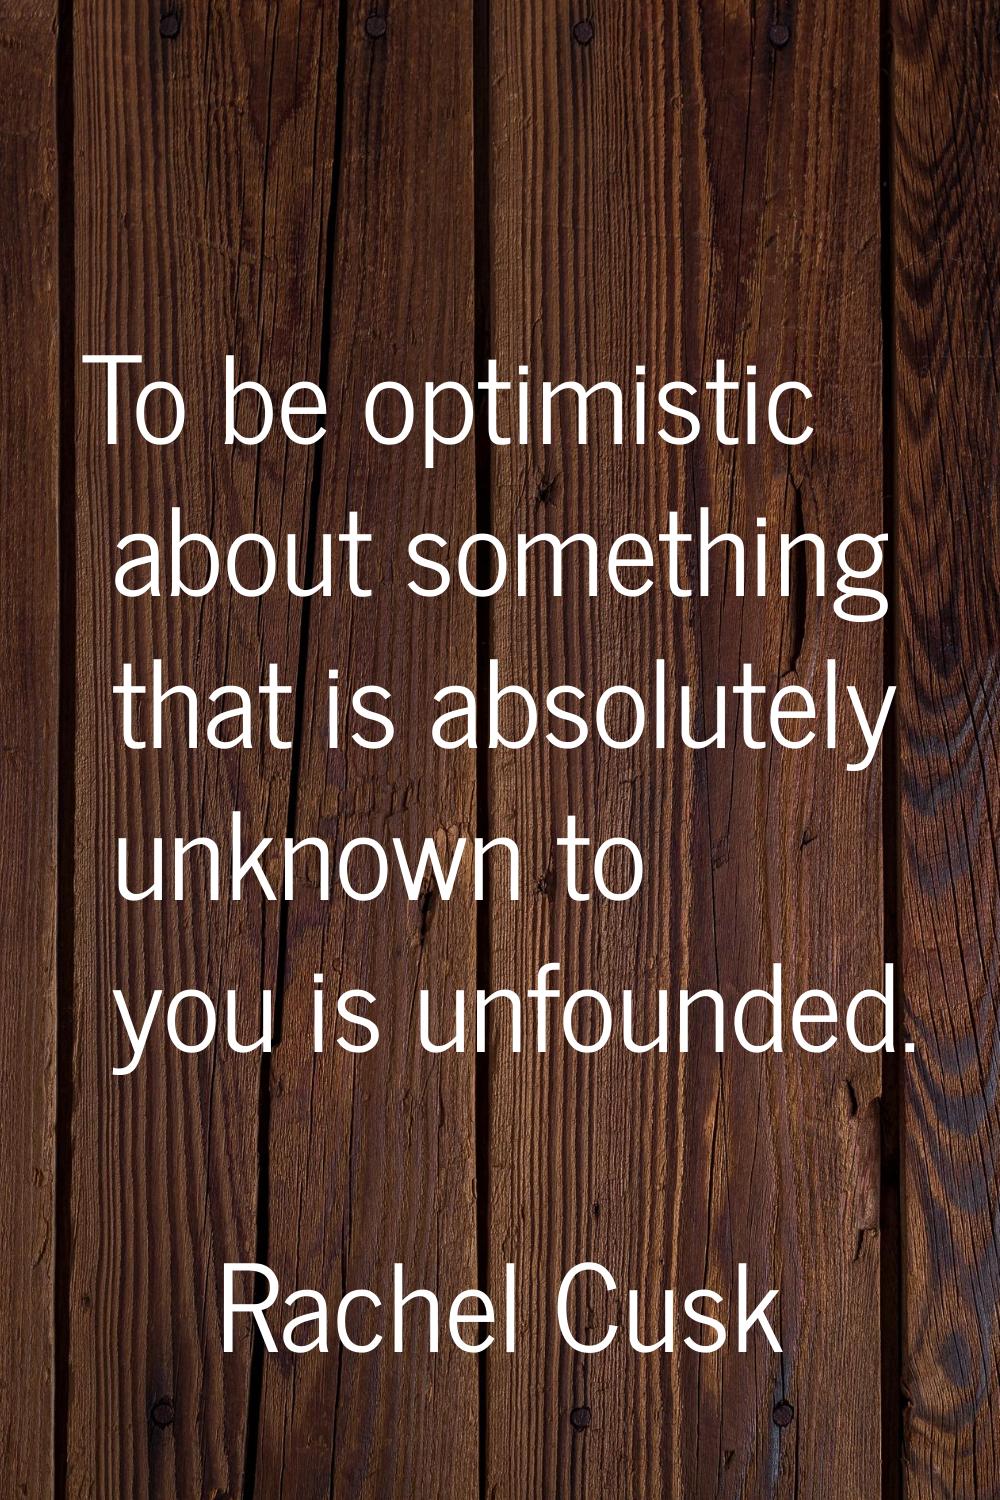 To be optimistic about something that is absolutely unknown to you is unfounded.